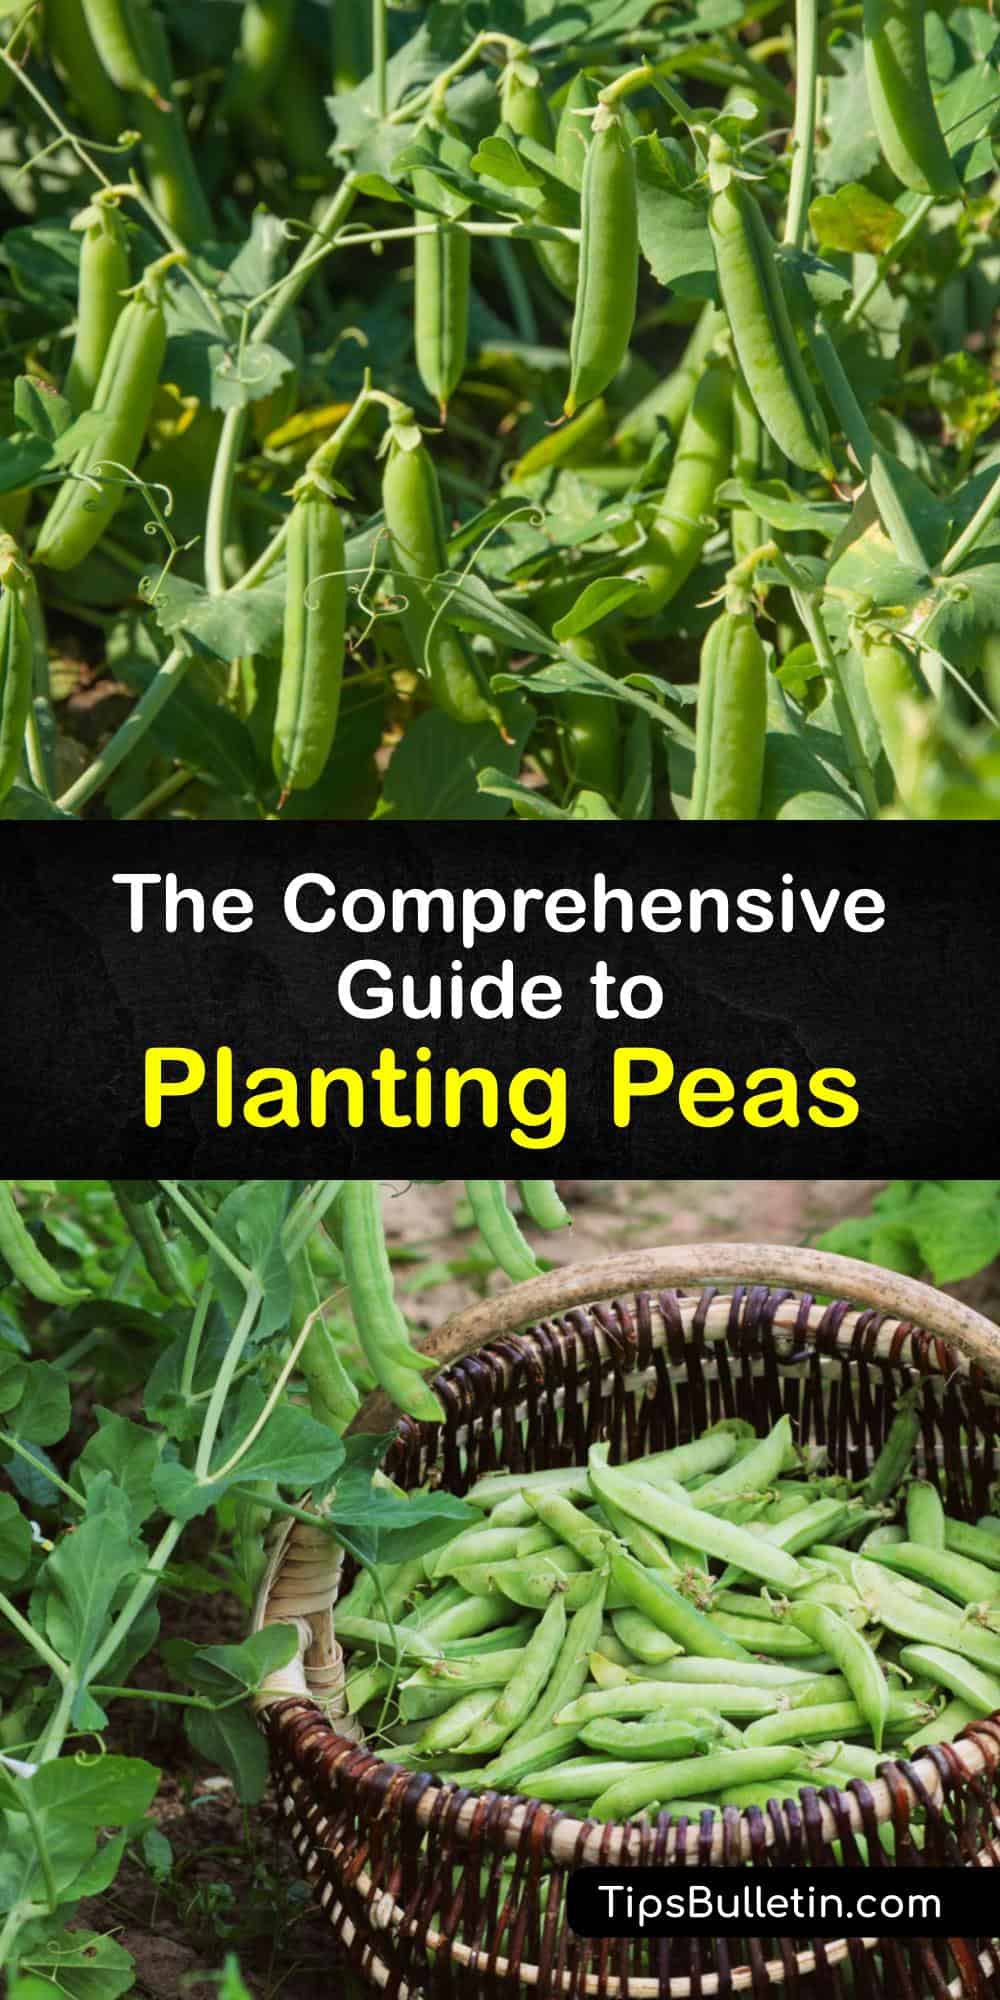 Growing Pea Plants - Easy Planting Tips for Peas